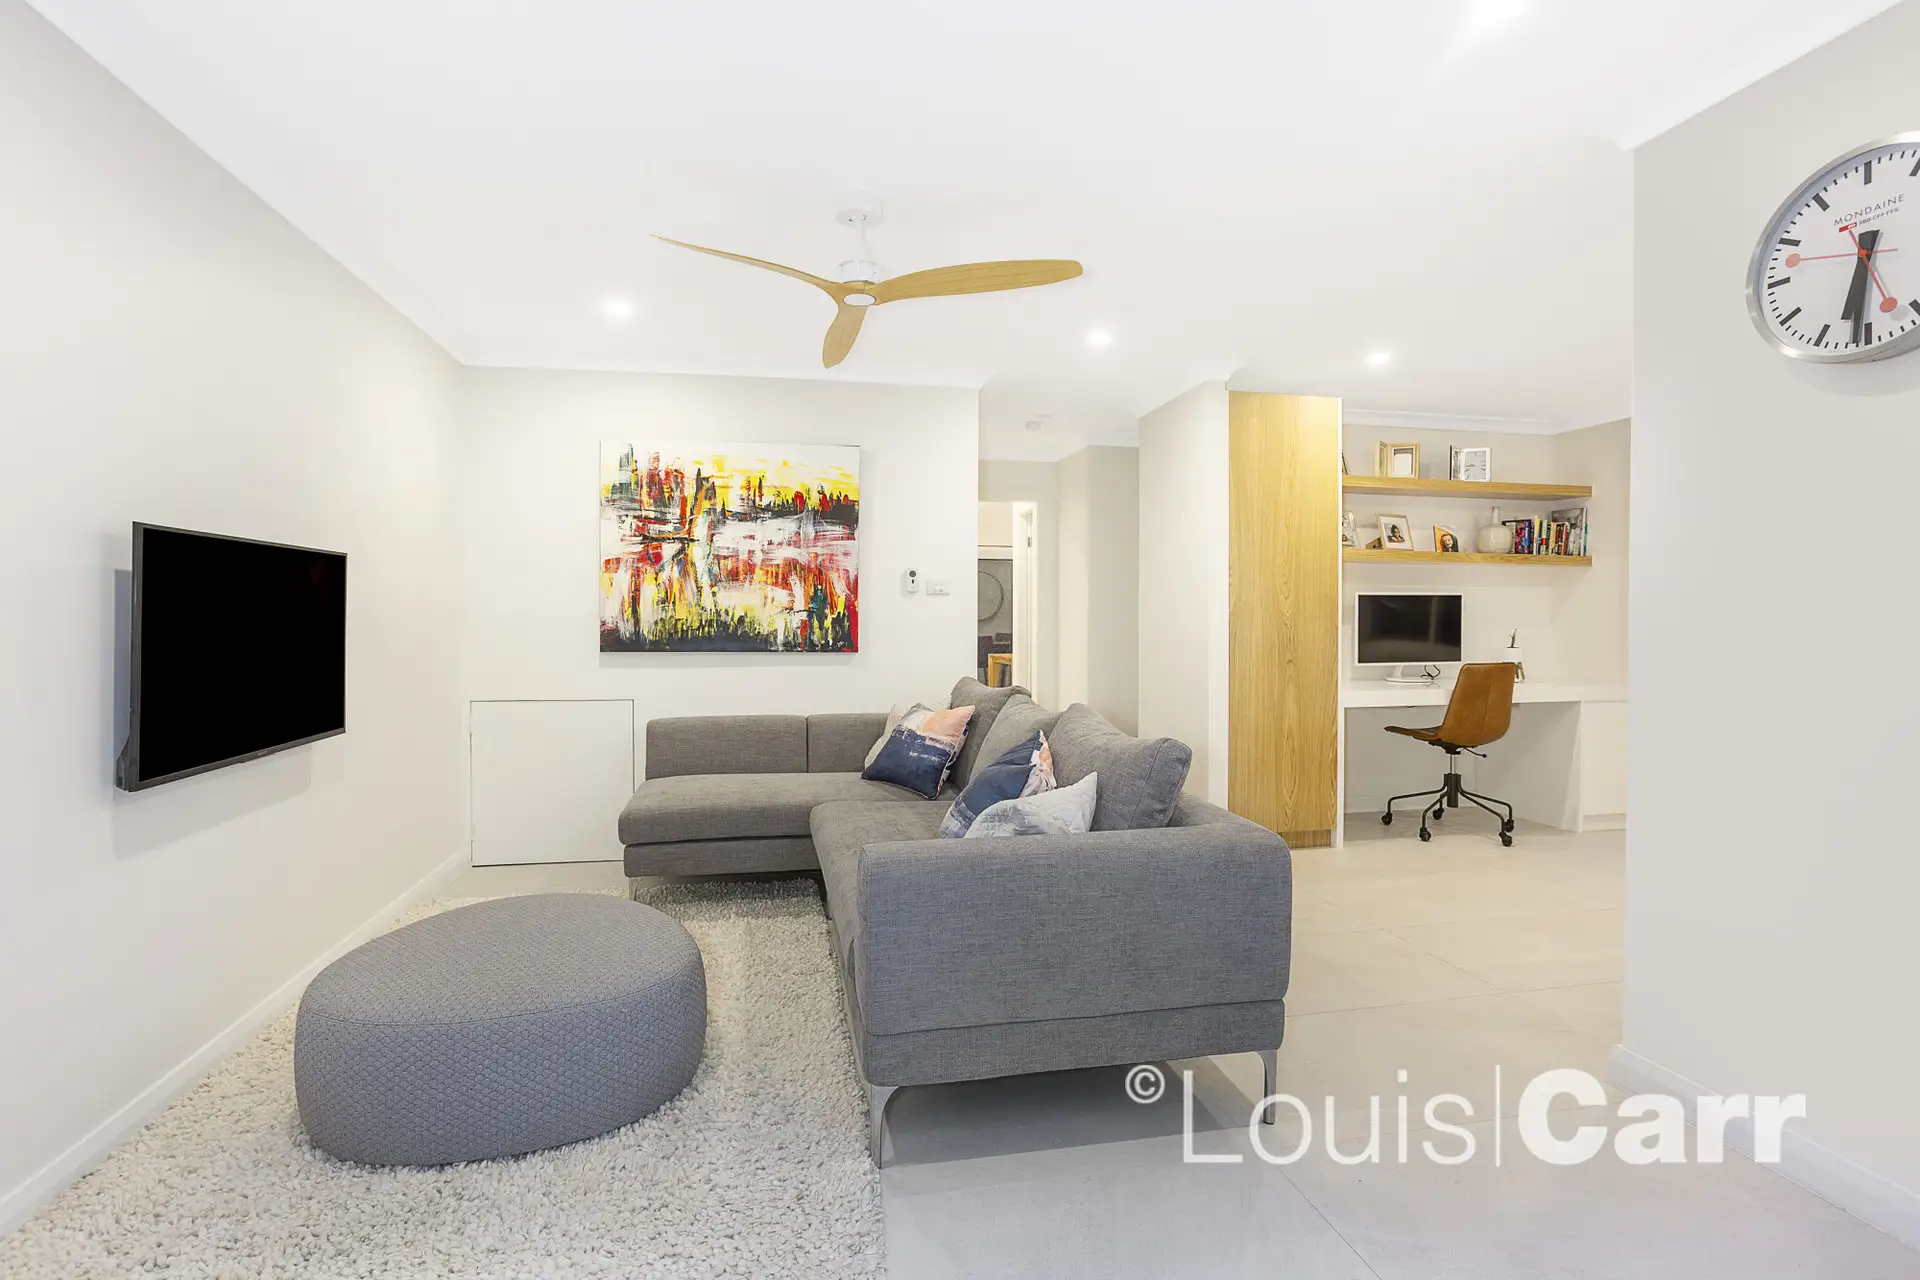 Photo #1: 5a Neptune Place, West Pennant Hills - Sold by Louis Carr Real Estate